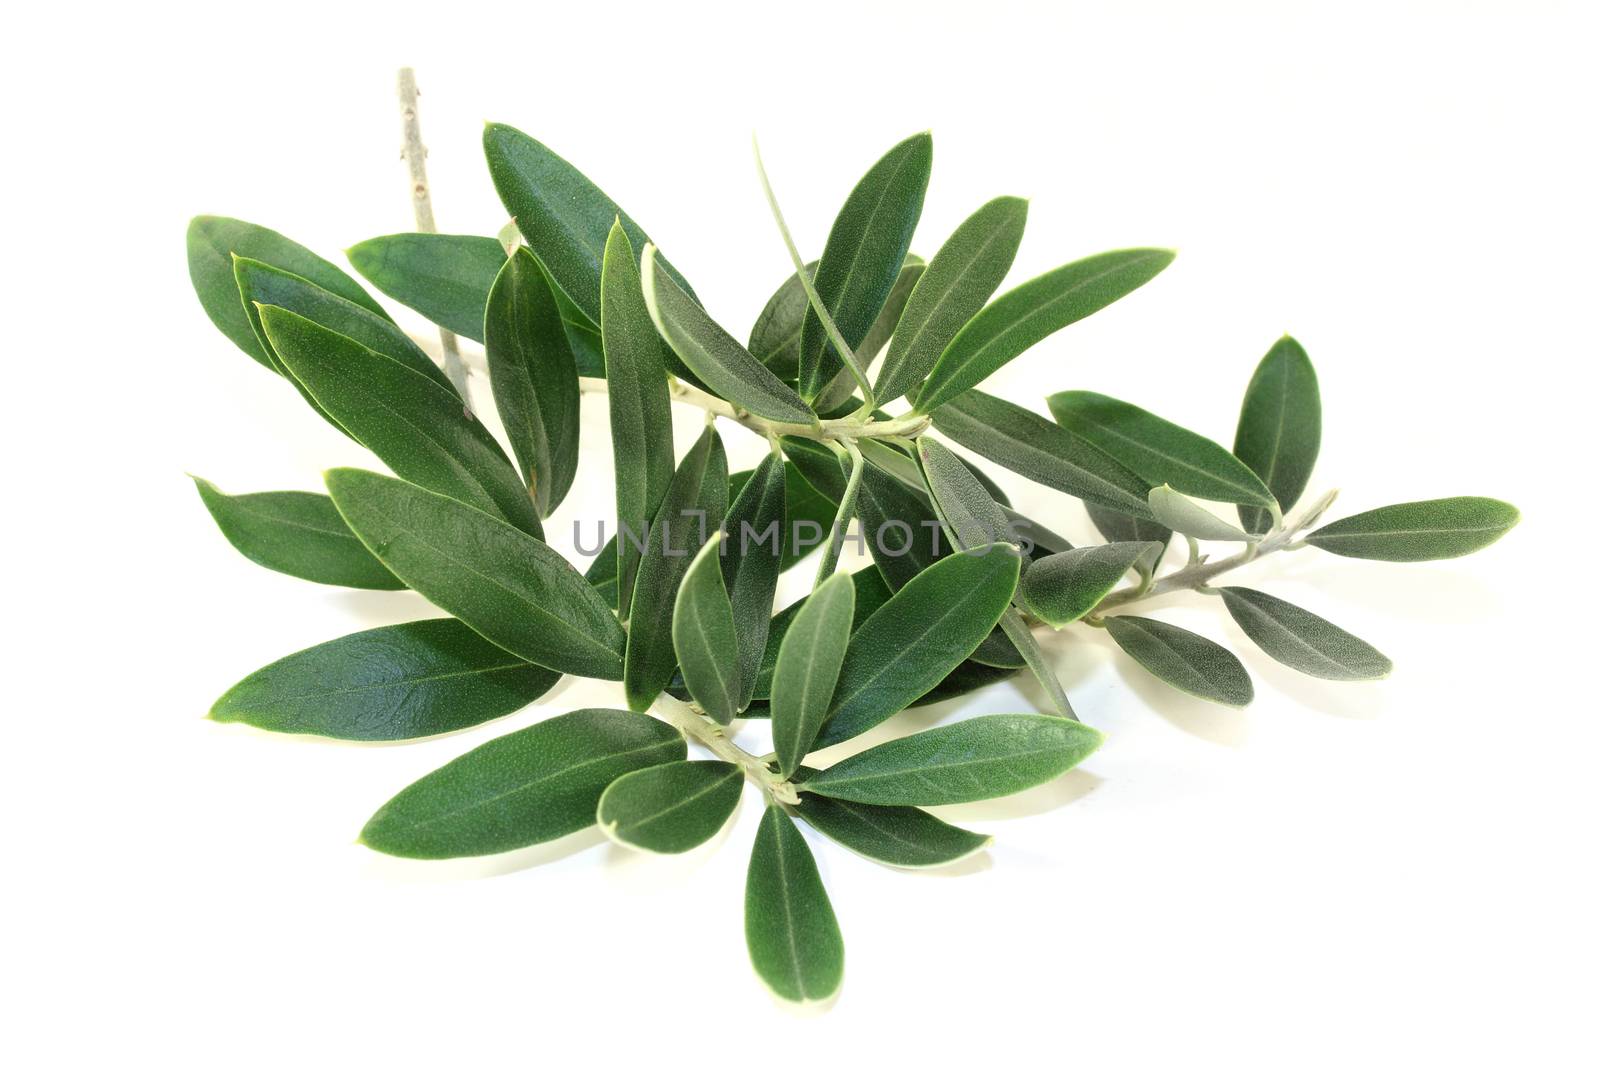 green olive branches on a bright background